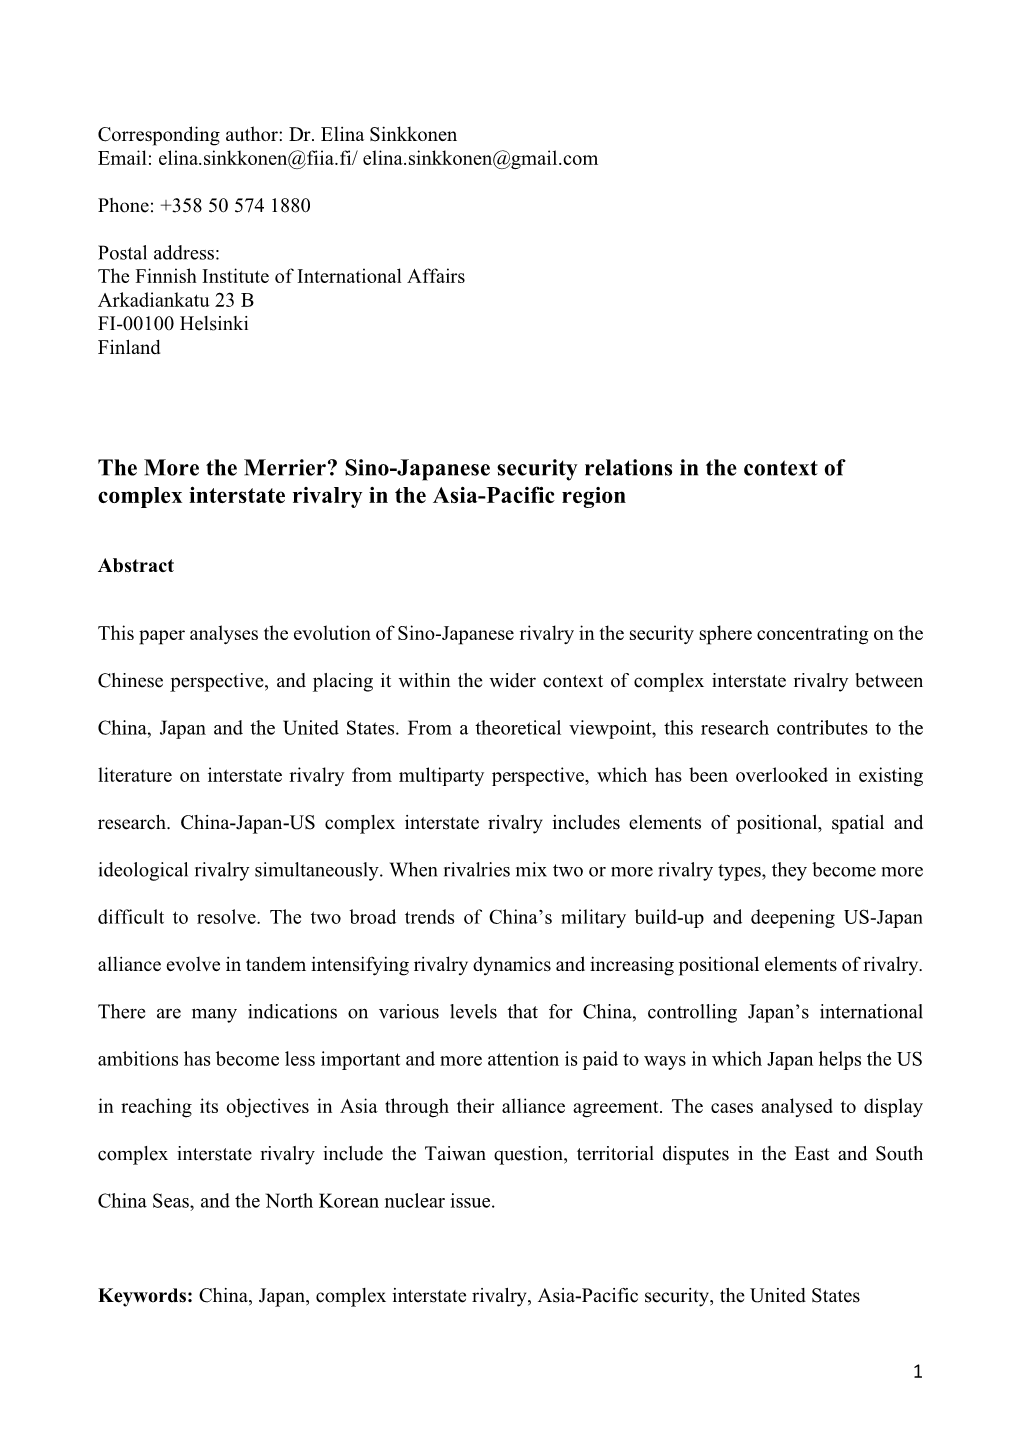 Sino-Japanese Security Relations in the Context of Complex Interstate Rivalry in the Asia-Pacific Region